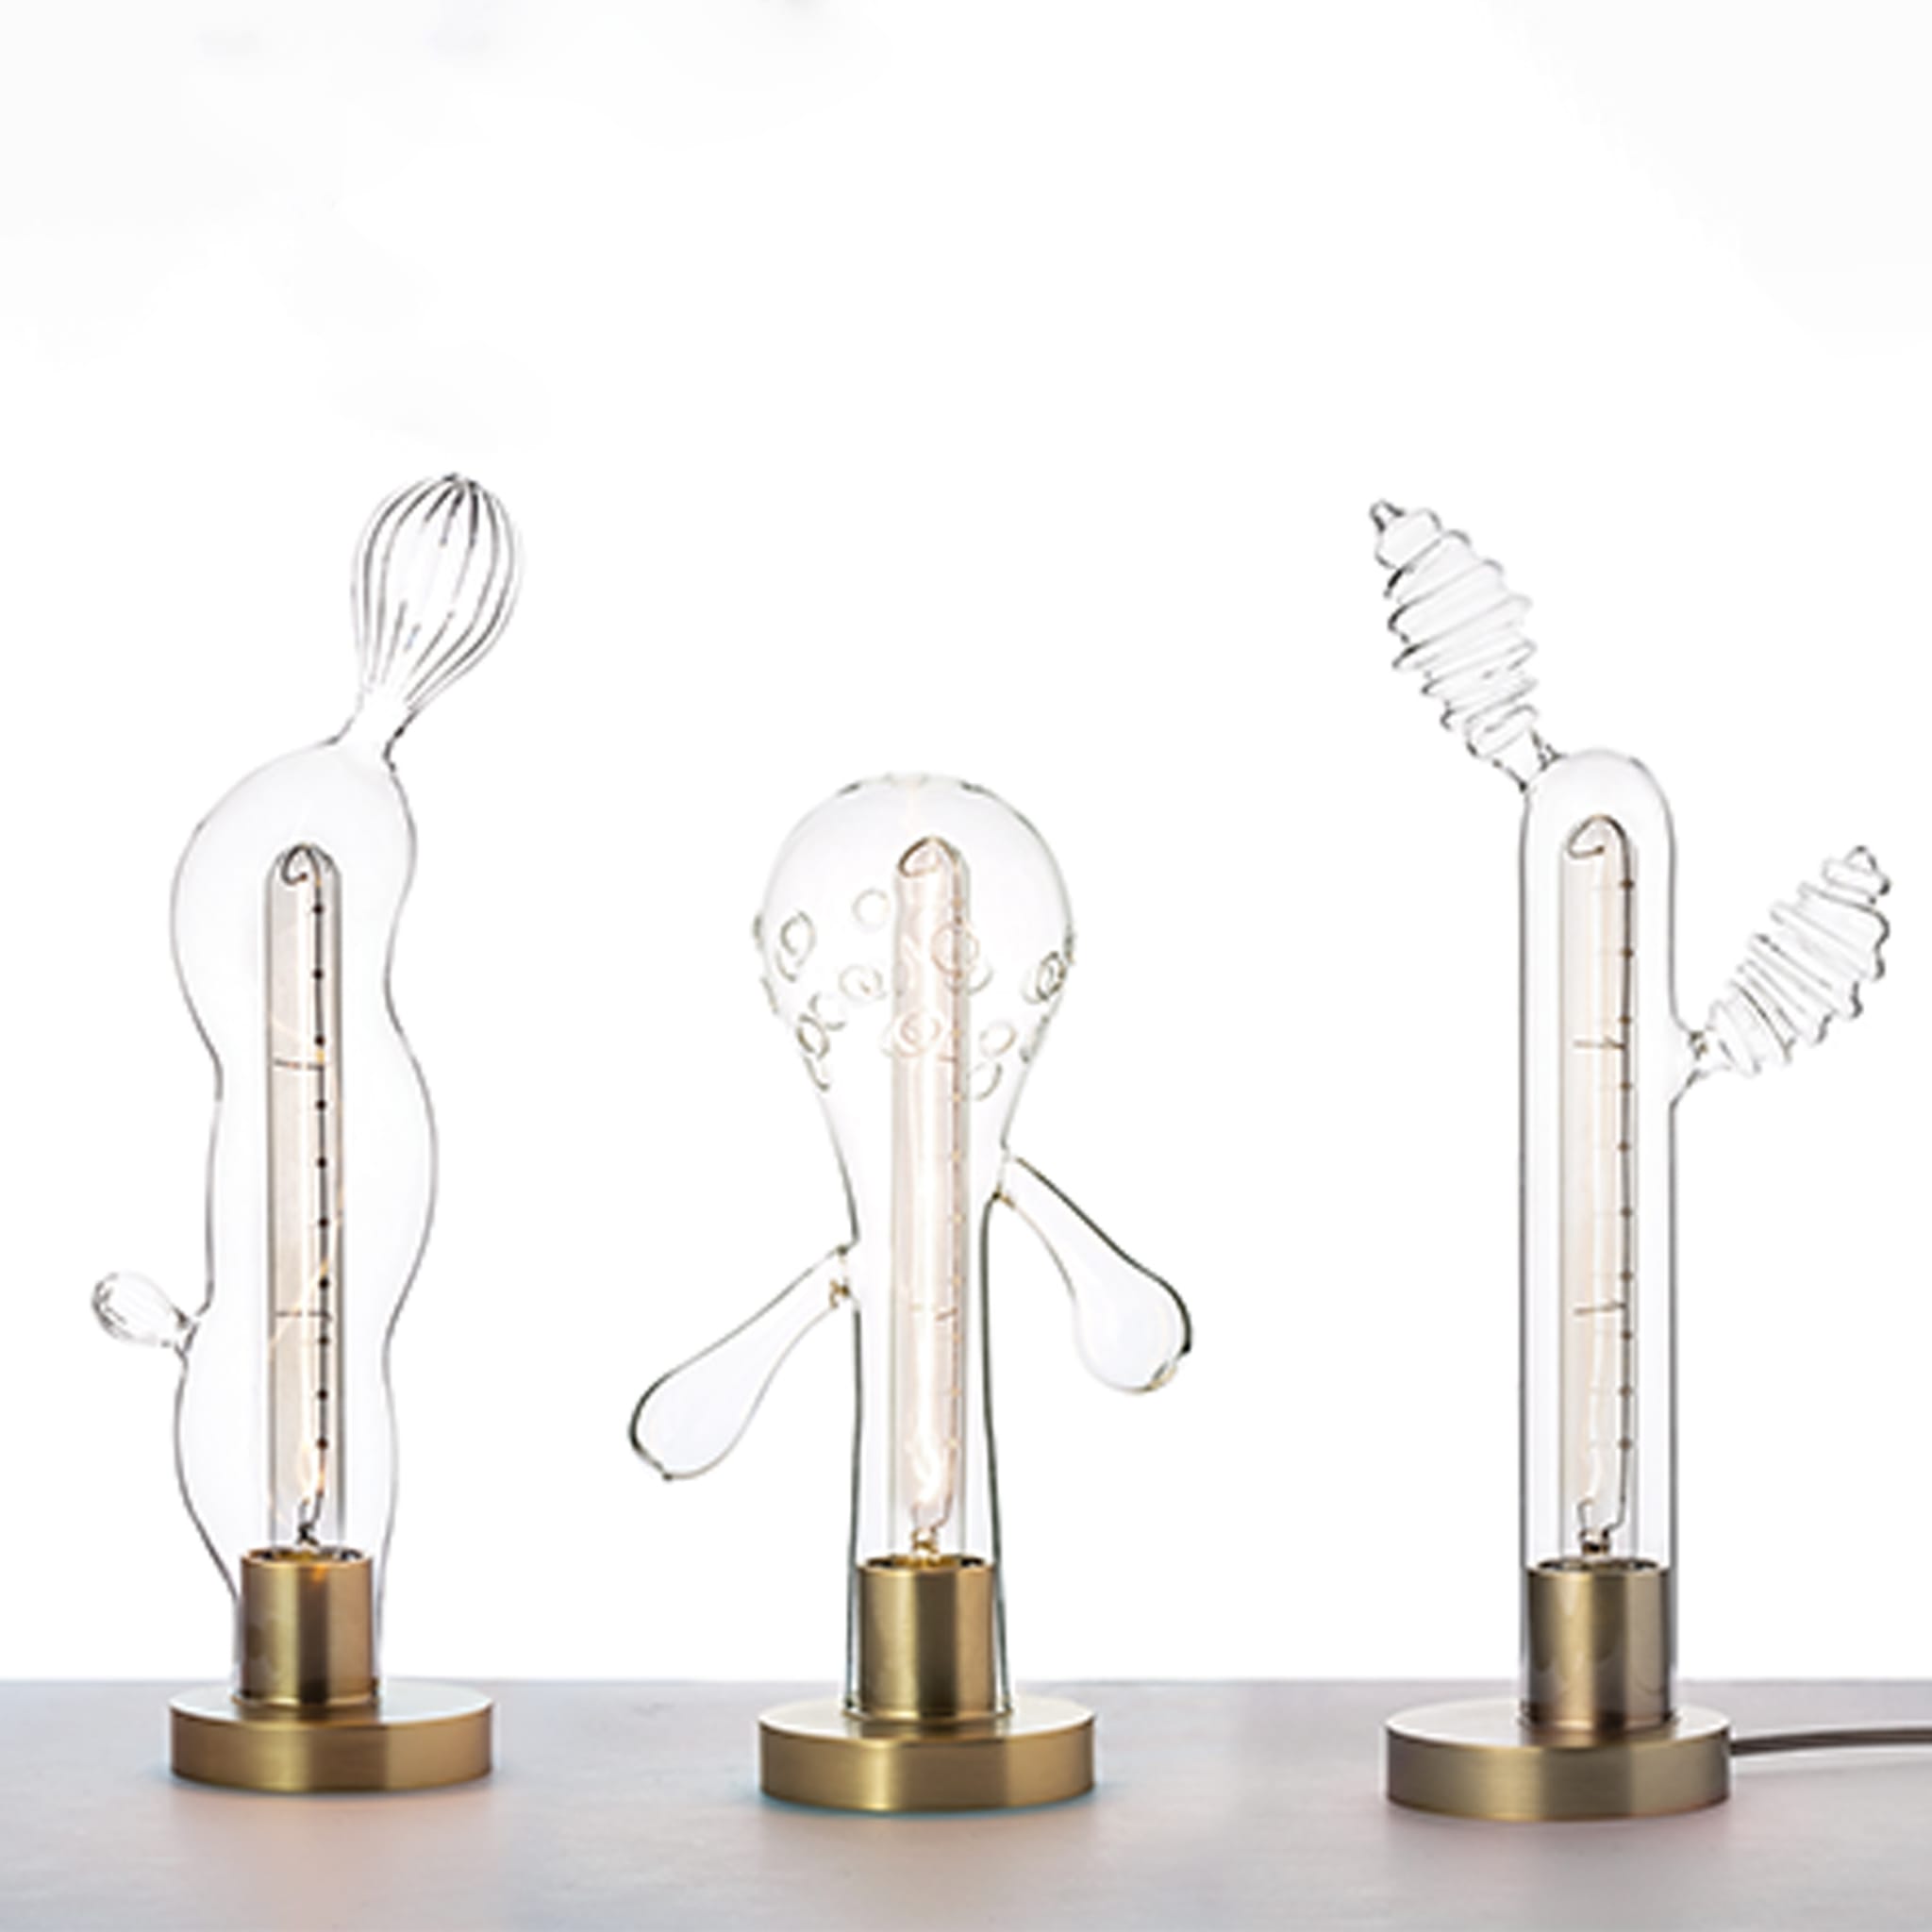 Transgenic Lights Table Lamps by Matteo Cibic #2 - Alternative view 1